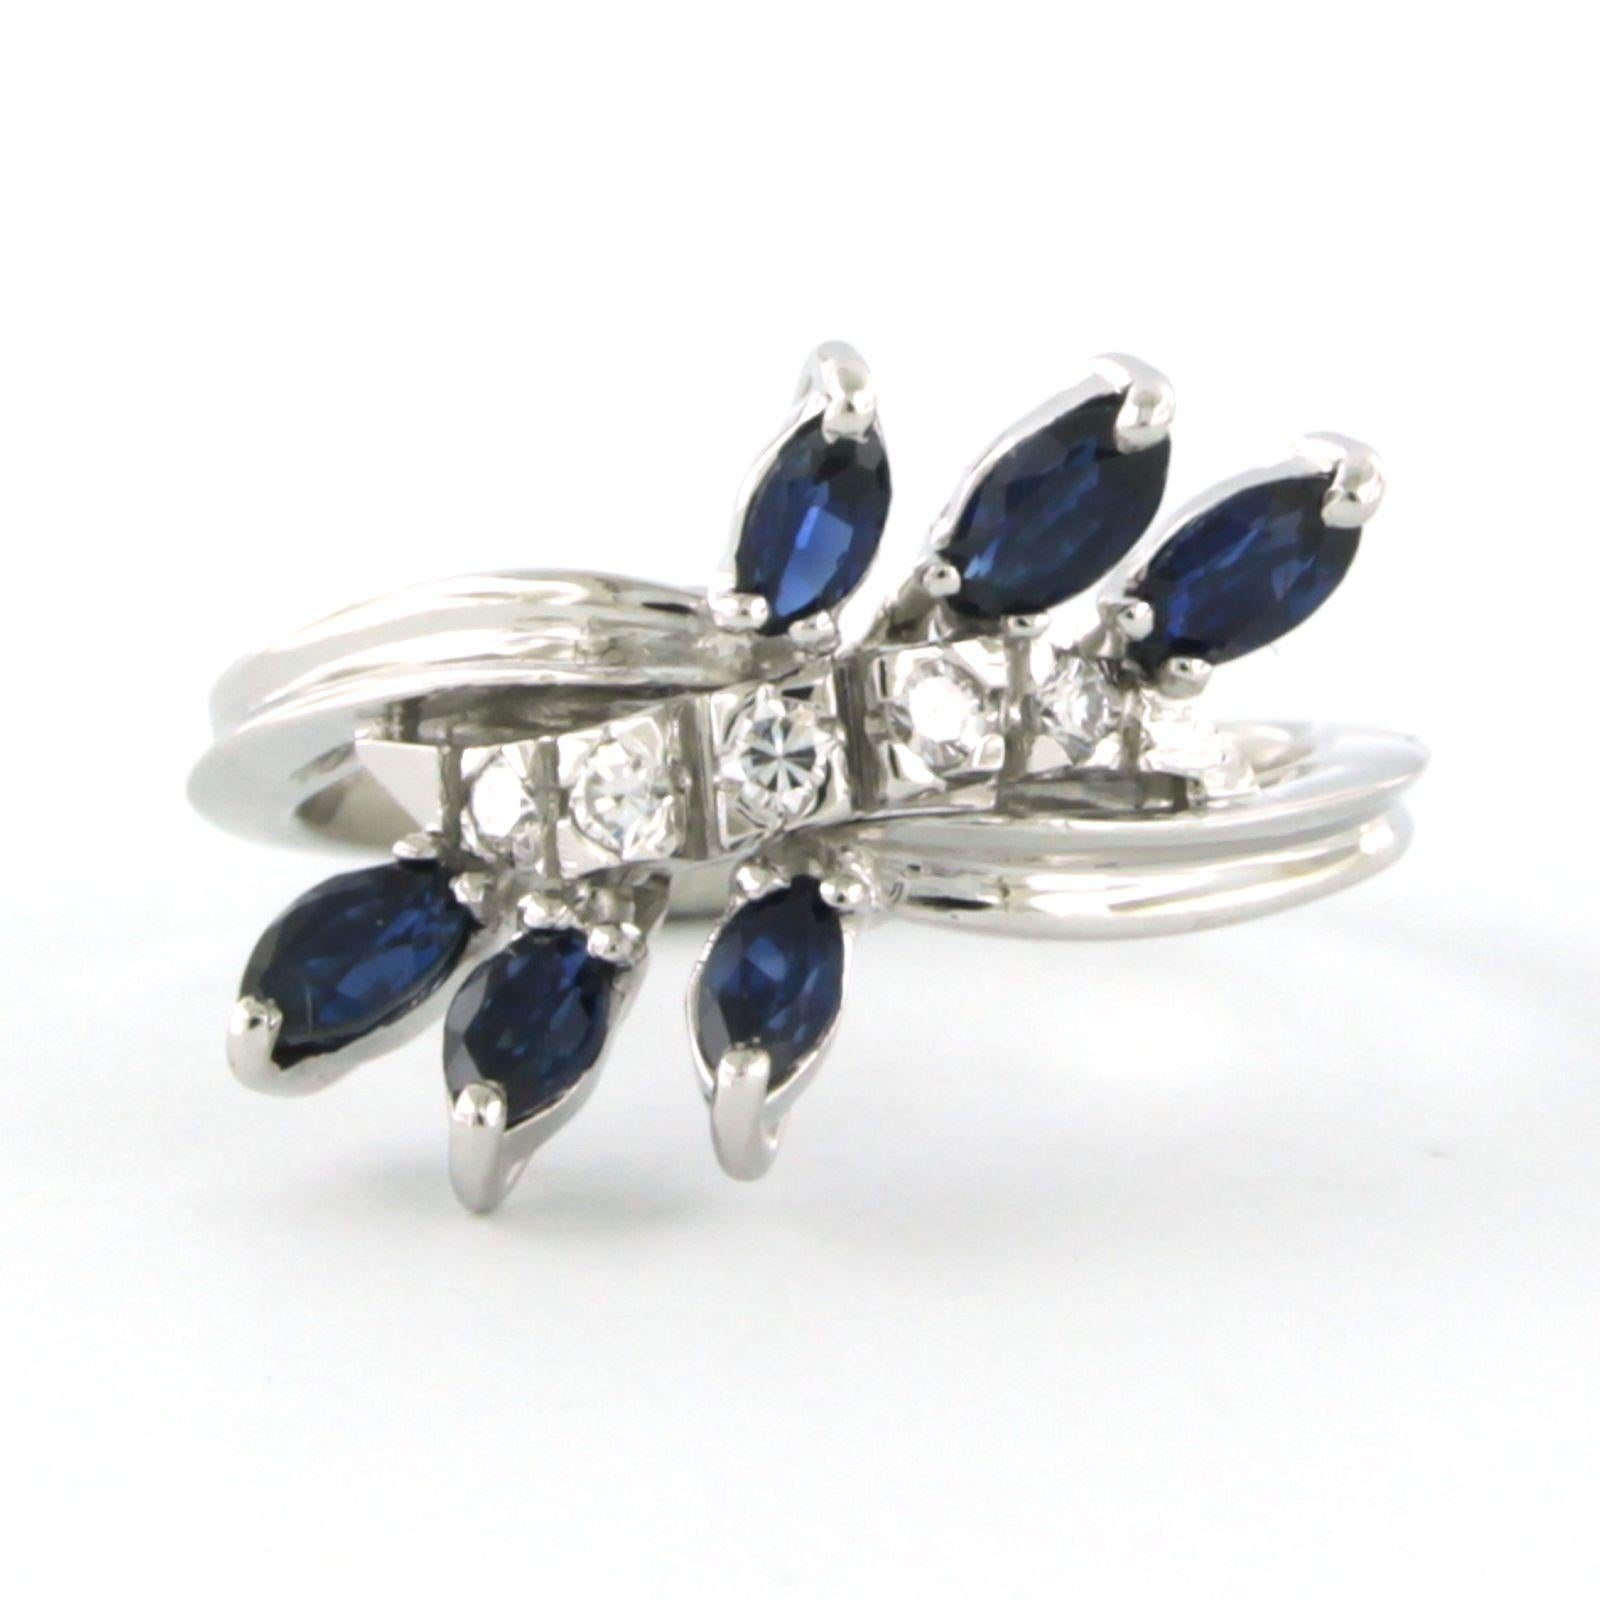 18k white gold ring set with sapphire and brilliant cut diamond. approx. 0.12ct - F/G - VS/SI - ring size U.S. 6 -EU. 16.5 (52)

Detailed description

the top of the ring is 1.7 cm wide and 5.3 mm high

Ring size US 6 -EU. 16.5 (52), ring can be